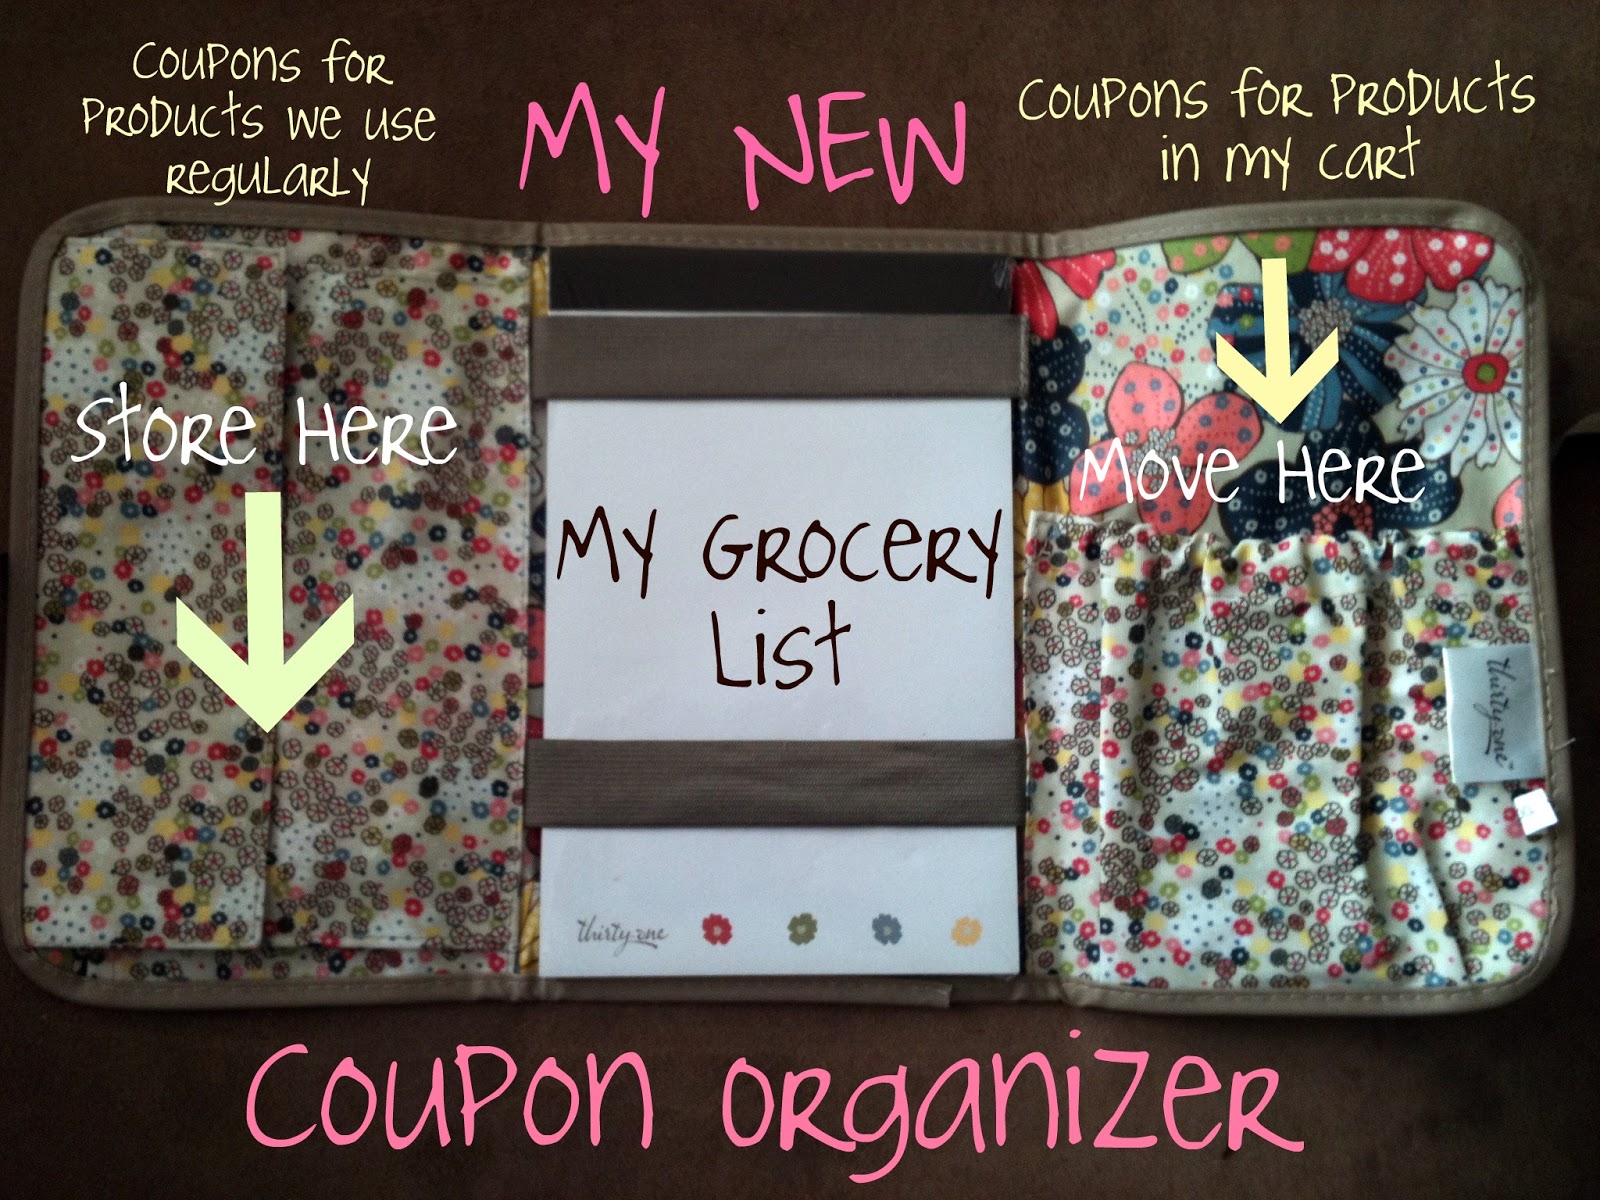 developed a system for it as my NEW coupon organizer!